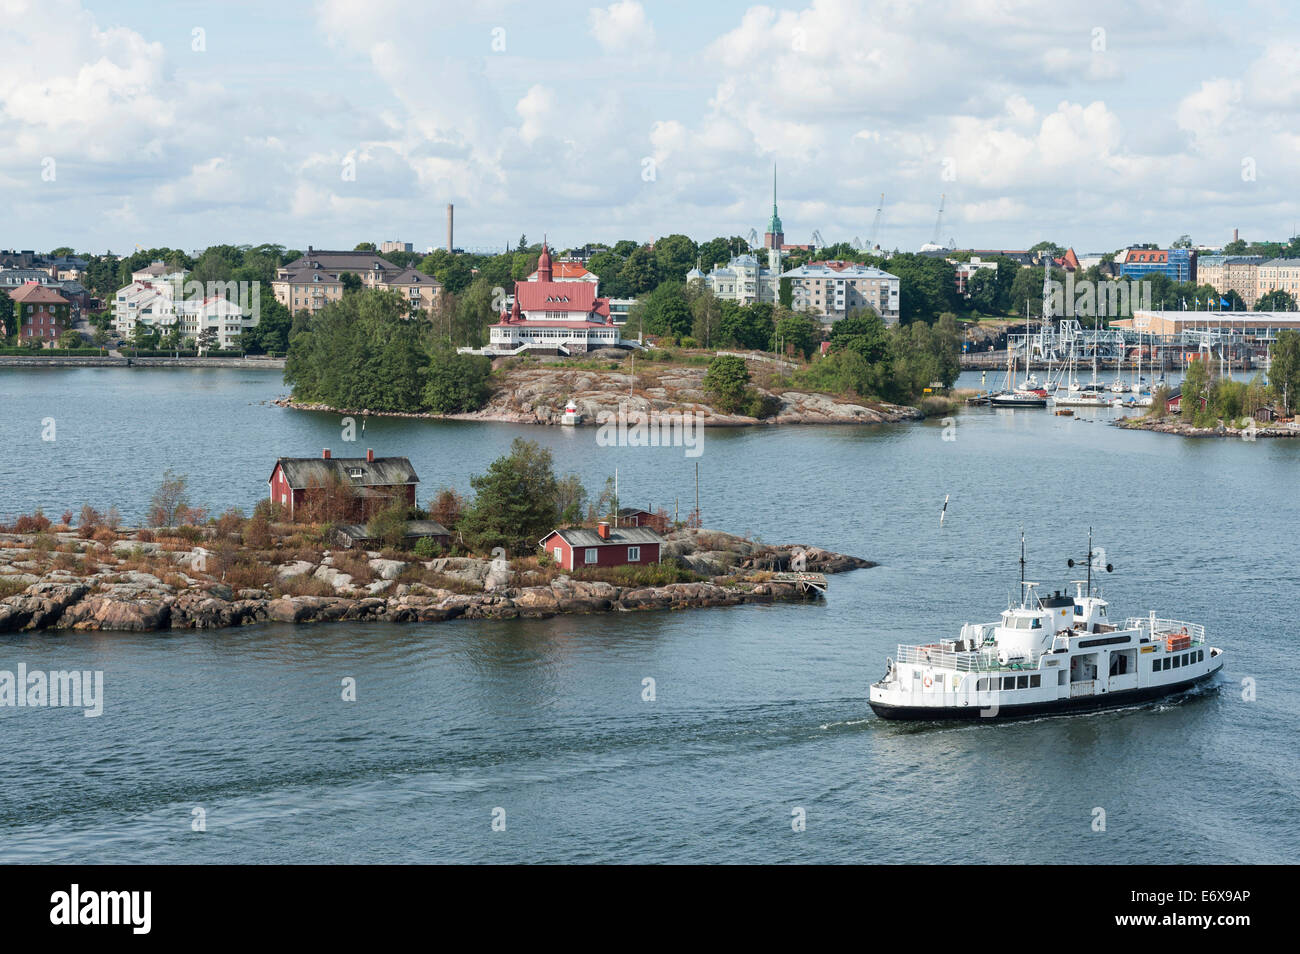 Ryssholmen island at the harbour entrance of Helsinki, at the back Luoto Island with the Archipel Restaurant, Helsinki, Finland Stock Photo